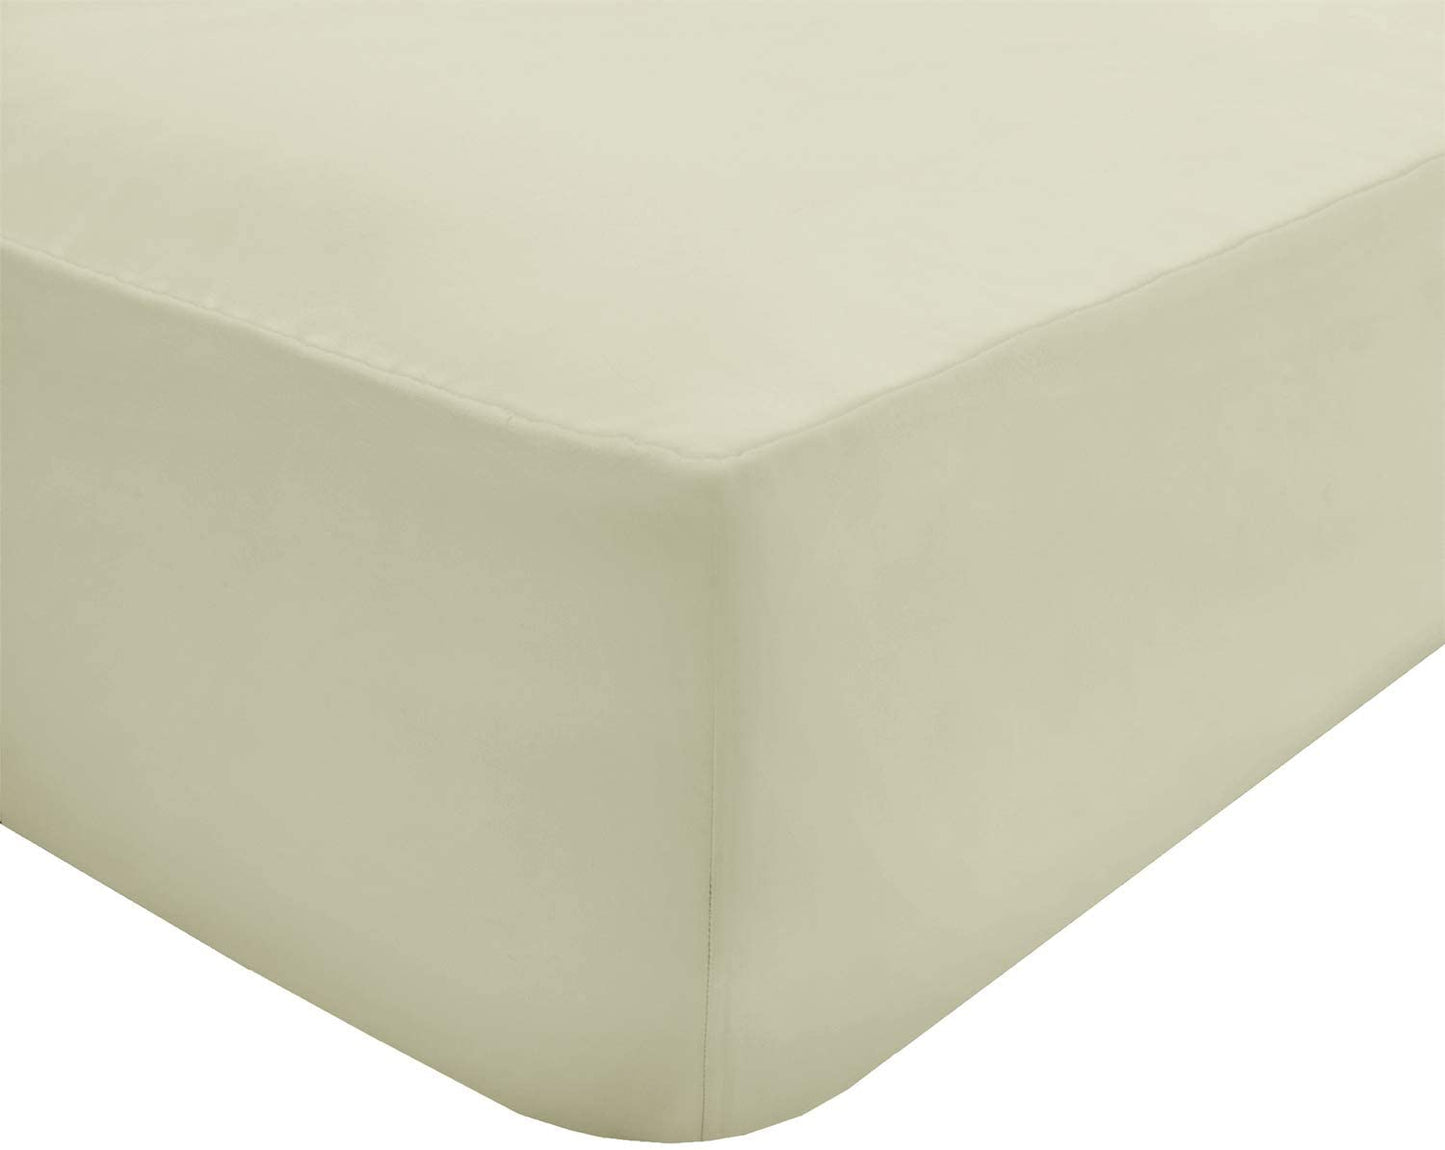 Fitted Sheets Cream Polycotton Luxury